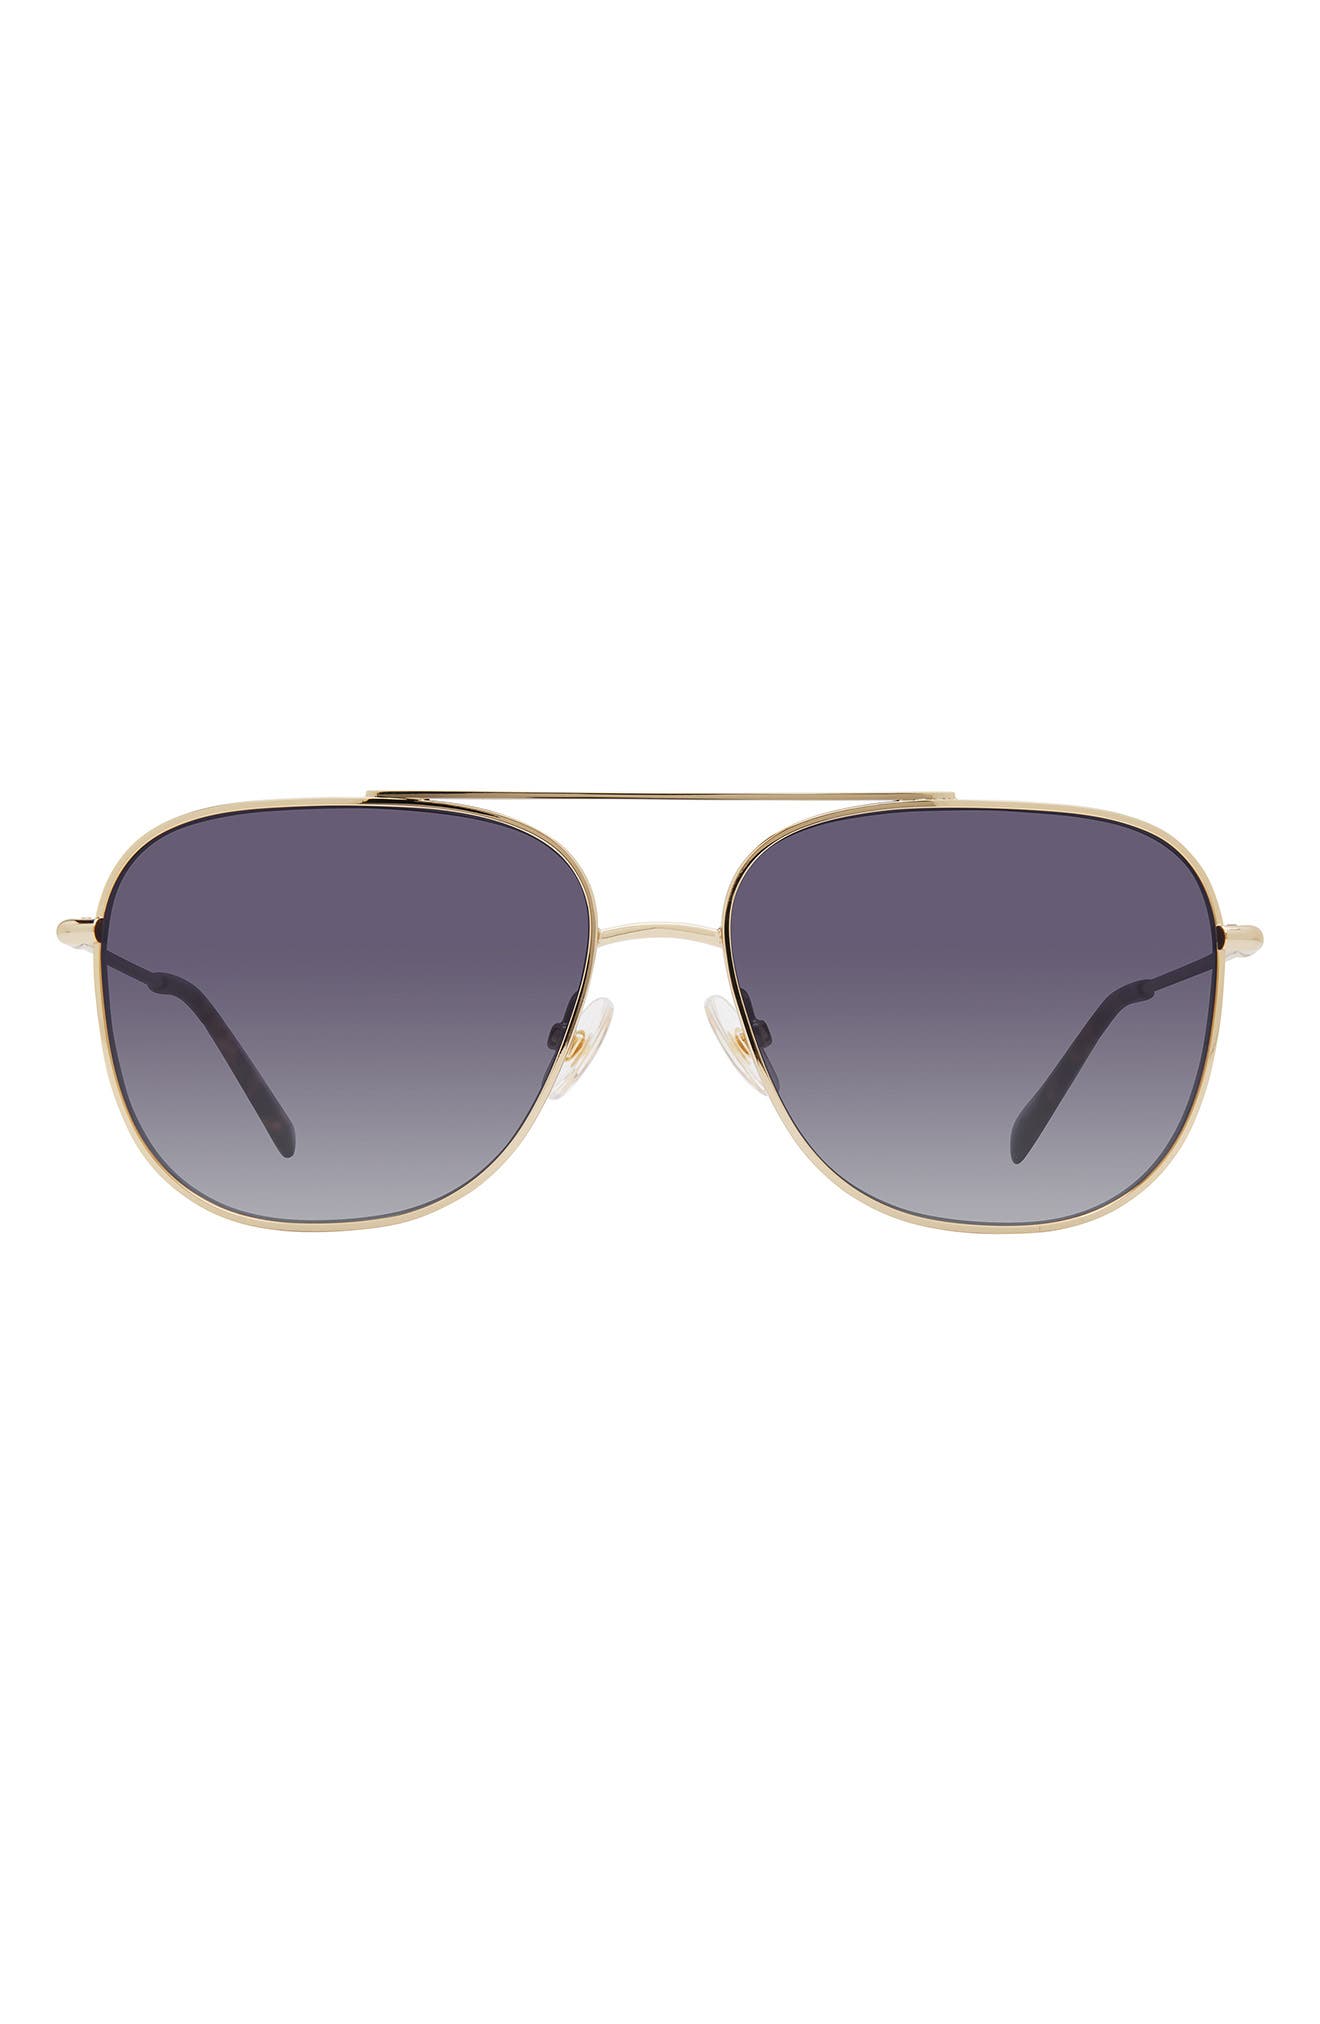 Rebecca Minkoff Lilly 56mm Gradient Aviator Sunglasses in Gold/Grey Shaded at Nordstrom